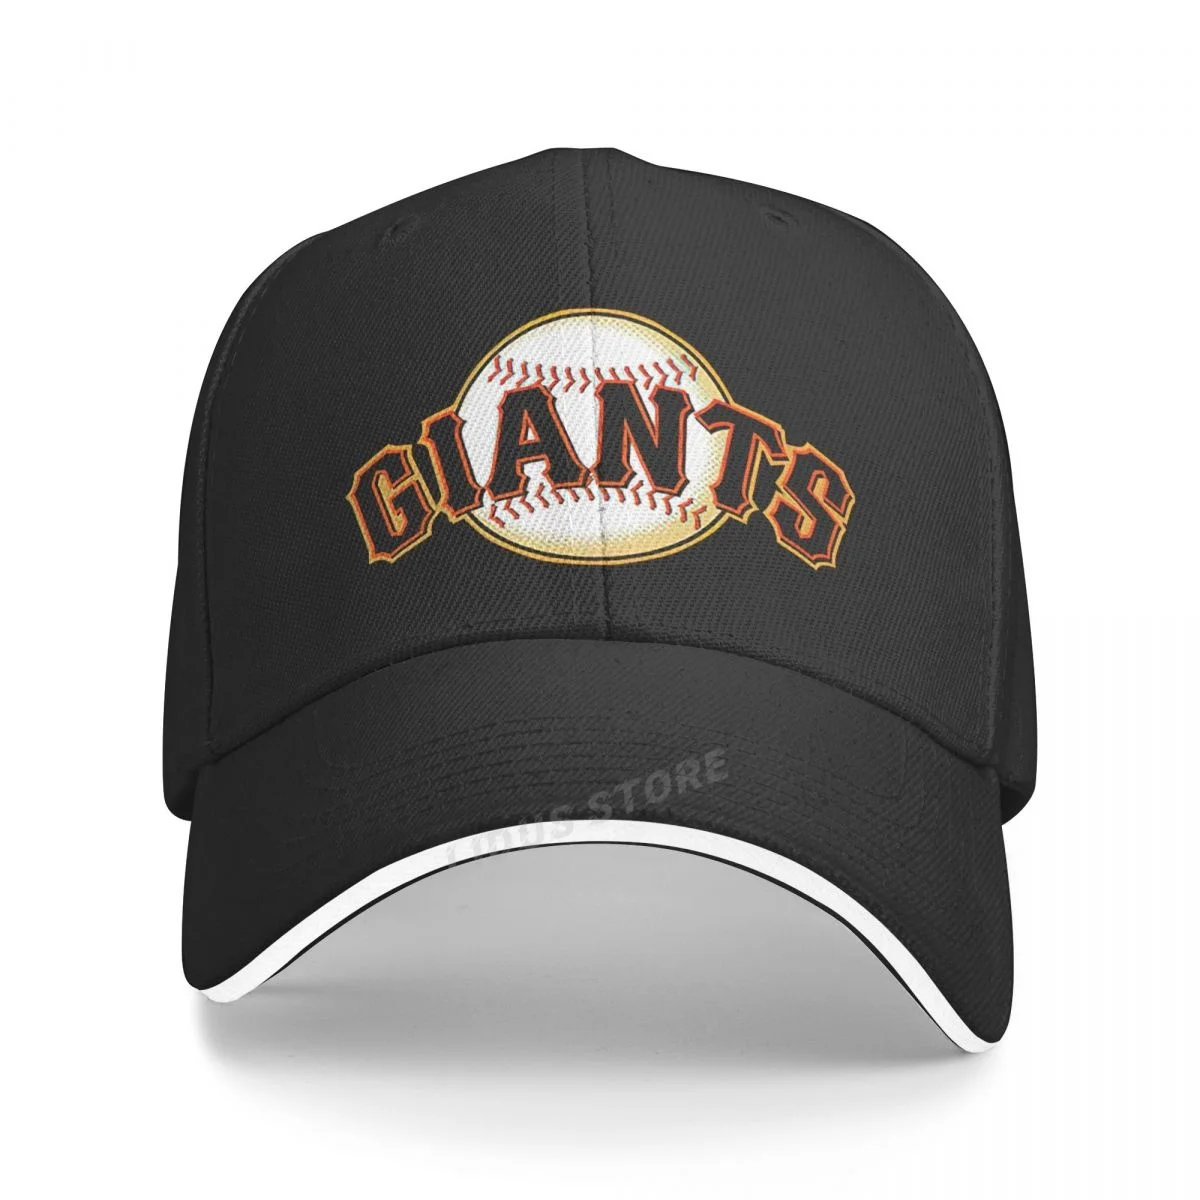 Giants Balls From San Francisco Baseball Cap Hat Bonnet Casquette Outdoor Boys Solid Color Spring Women Casual Fish